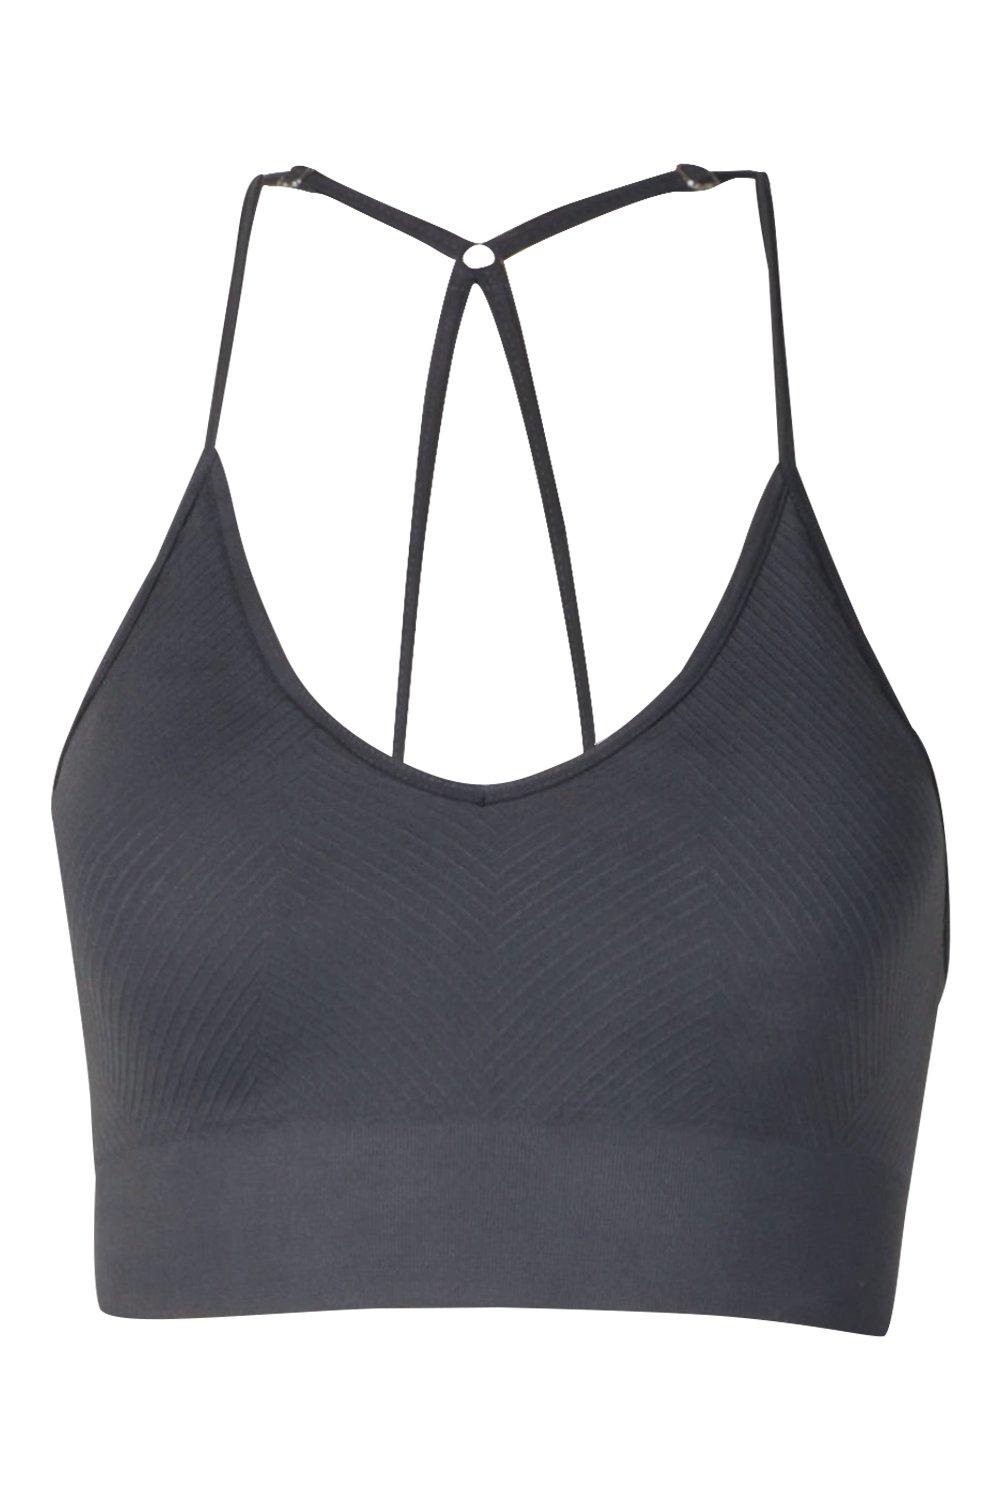 Boohoo Fit Ribbed Moulded Sports Bra. #boohoo #activewear